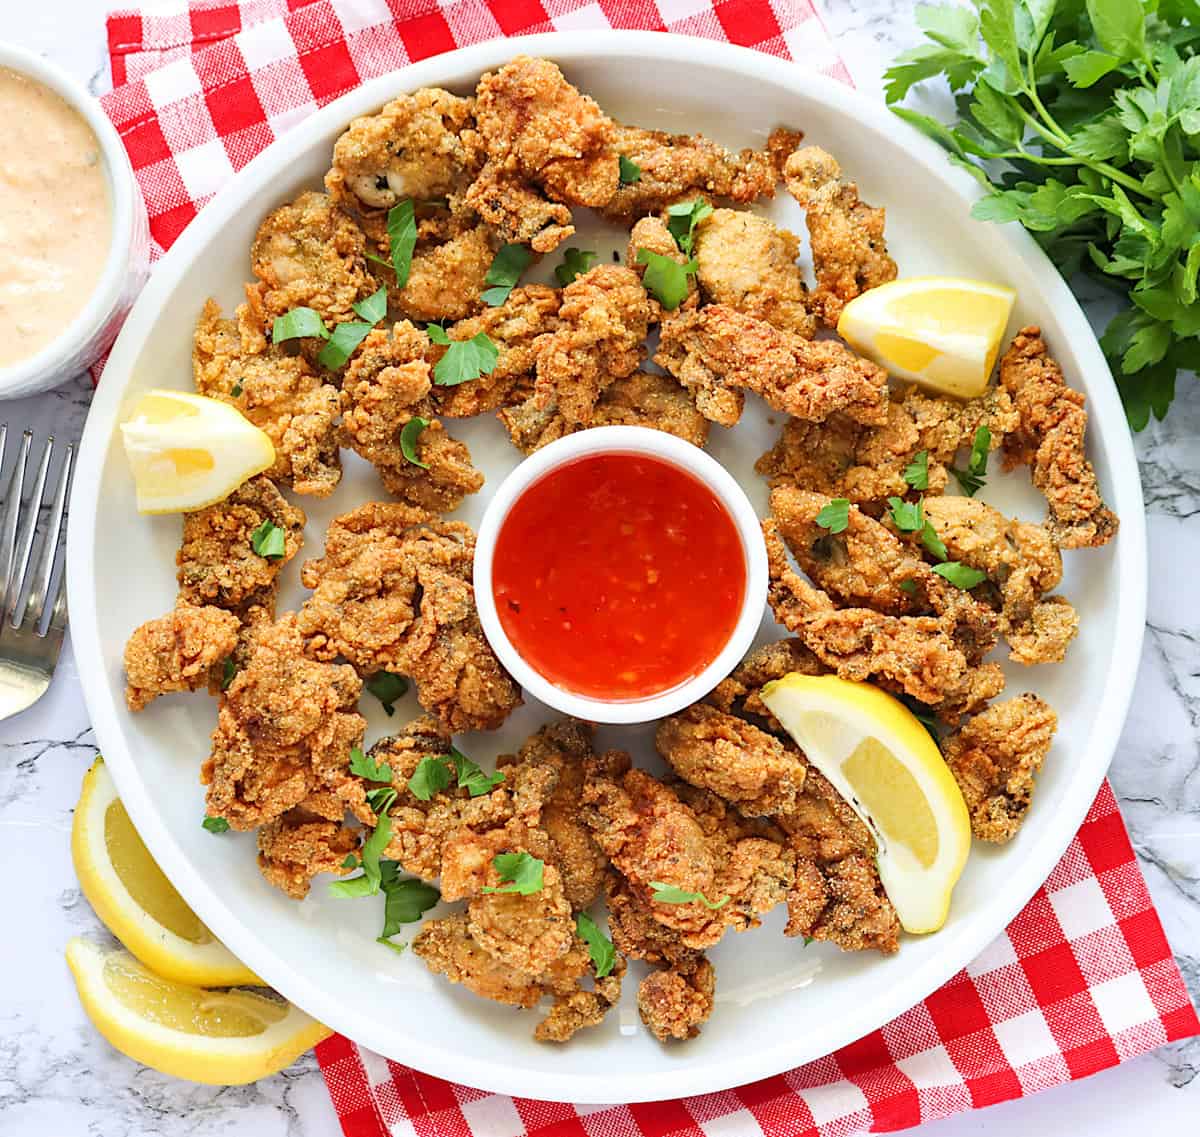 A platter of freshly fried oysters for an impressive game day appetizer